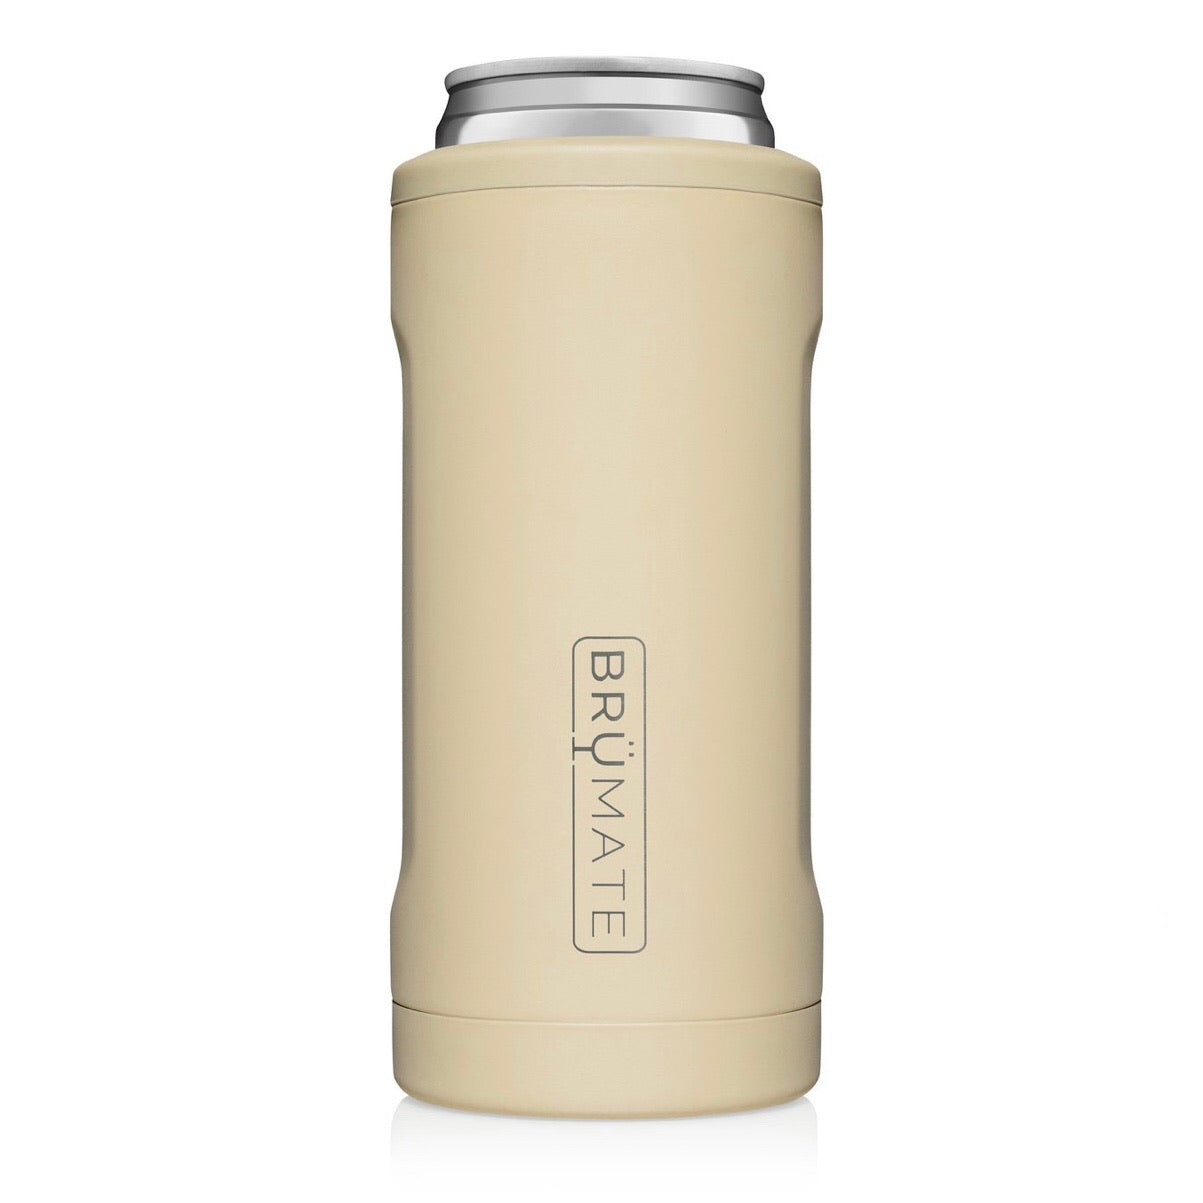 slim cans leak-proof drinkware hot to cold insulated drinkware tumbler like yeti brumate spillproof